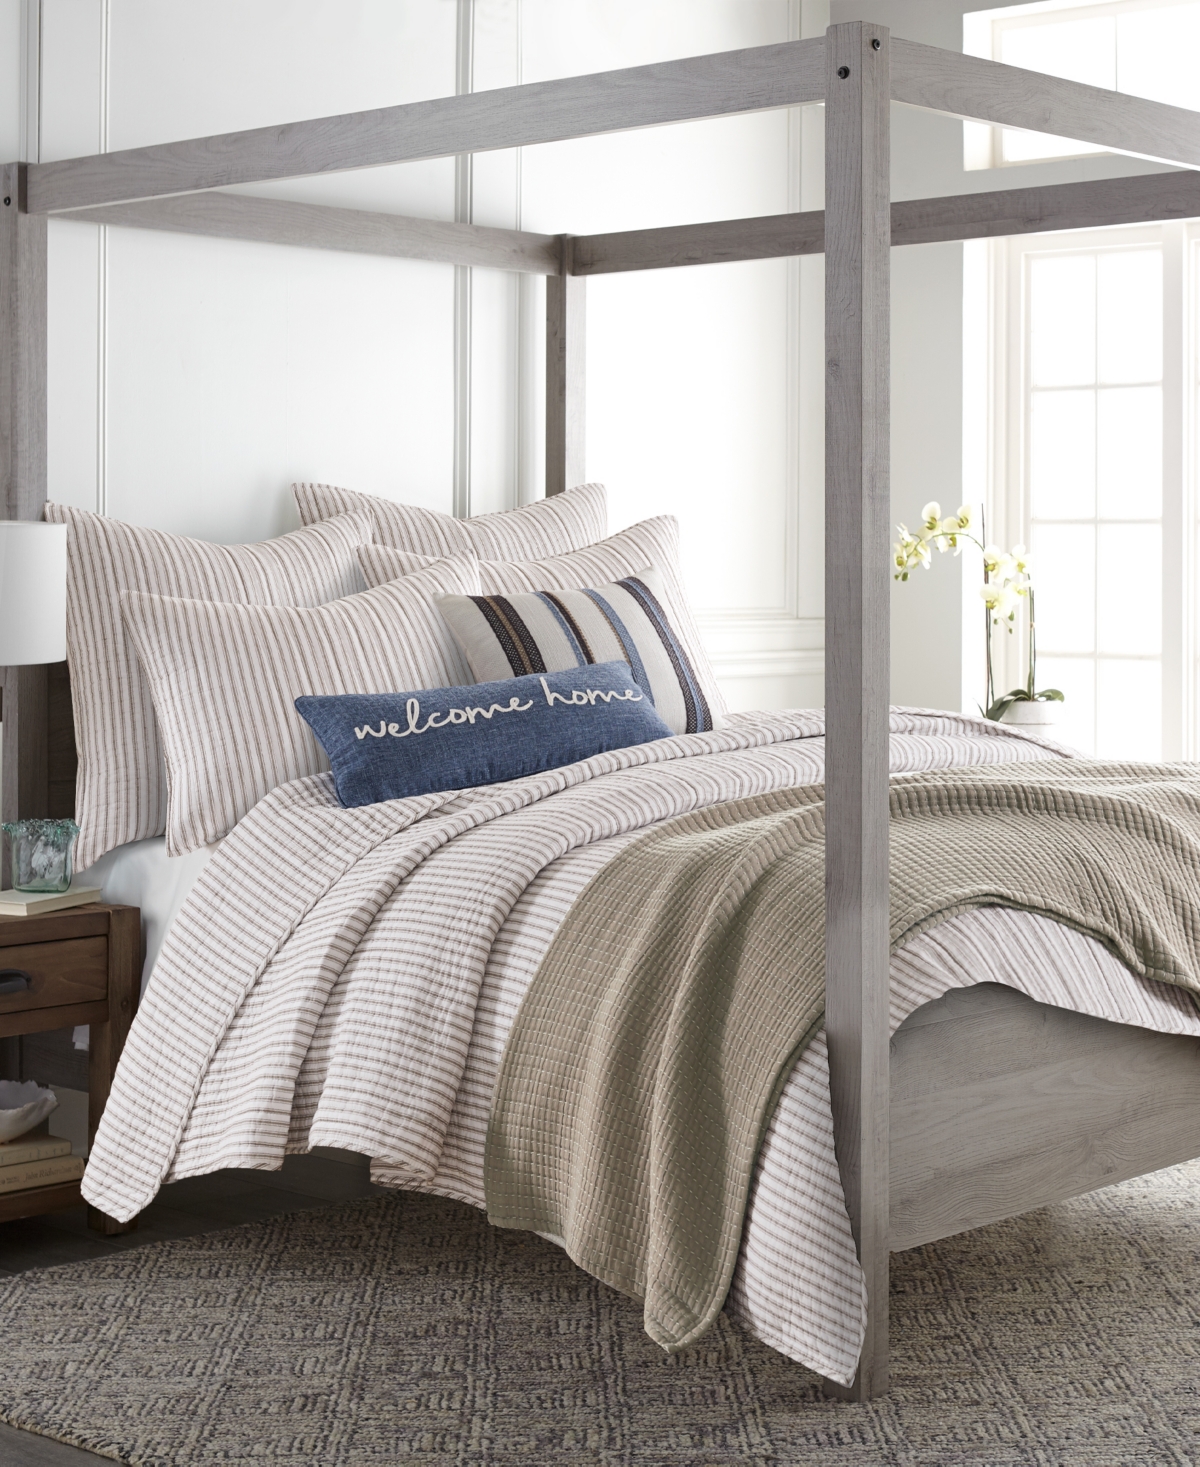 Levtex Tobago Stripe Reversible 2-pc. Quilt Set, Twin/twin Xl In Taupe